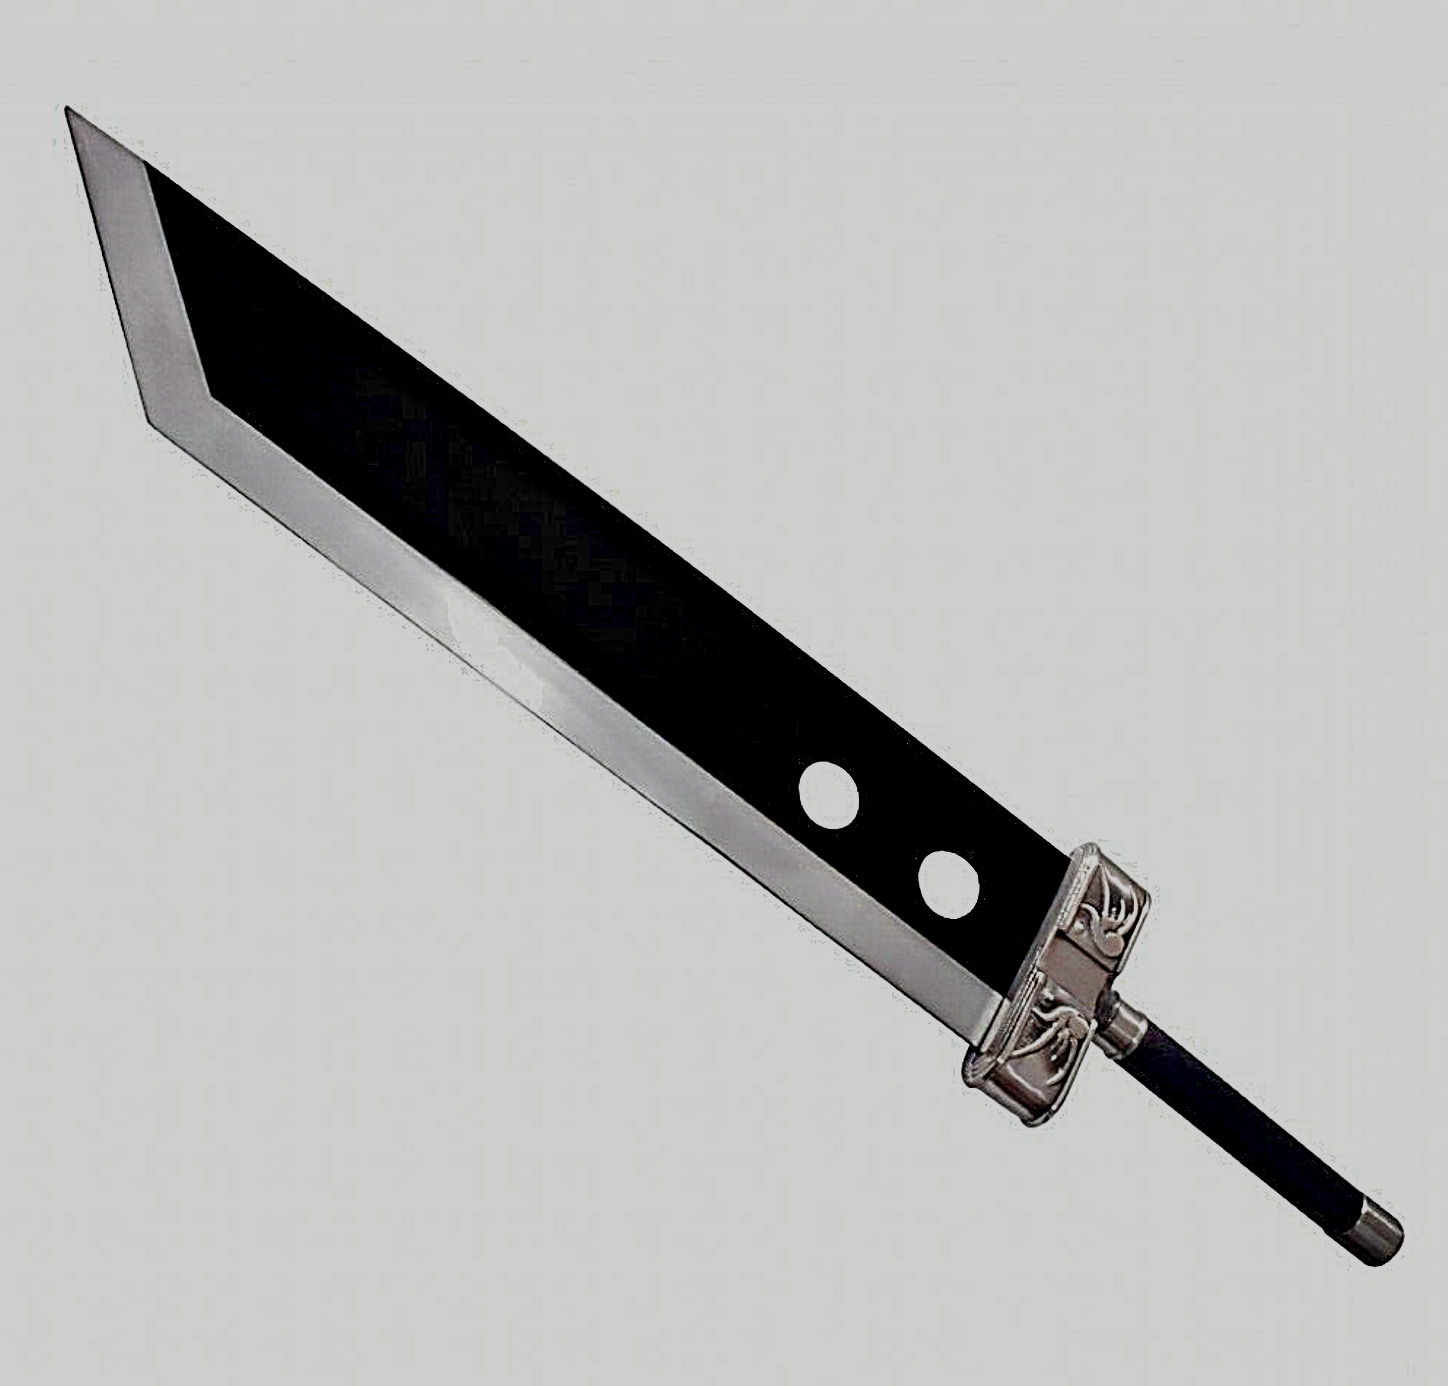 Steel Cloud Strife Buster Sword Replica with  Leather Sheath